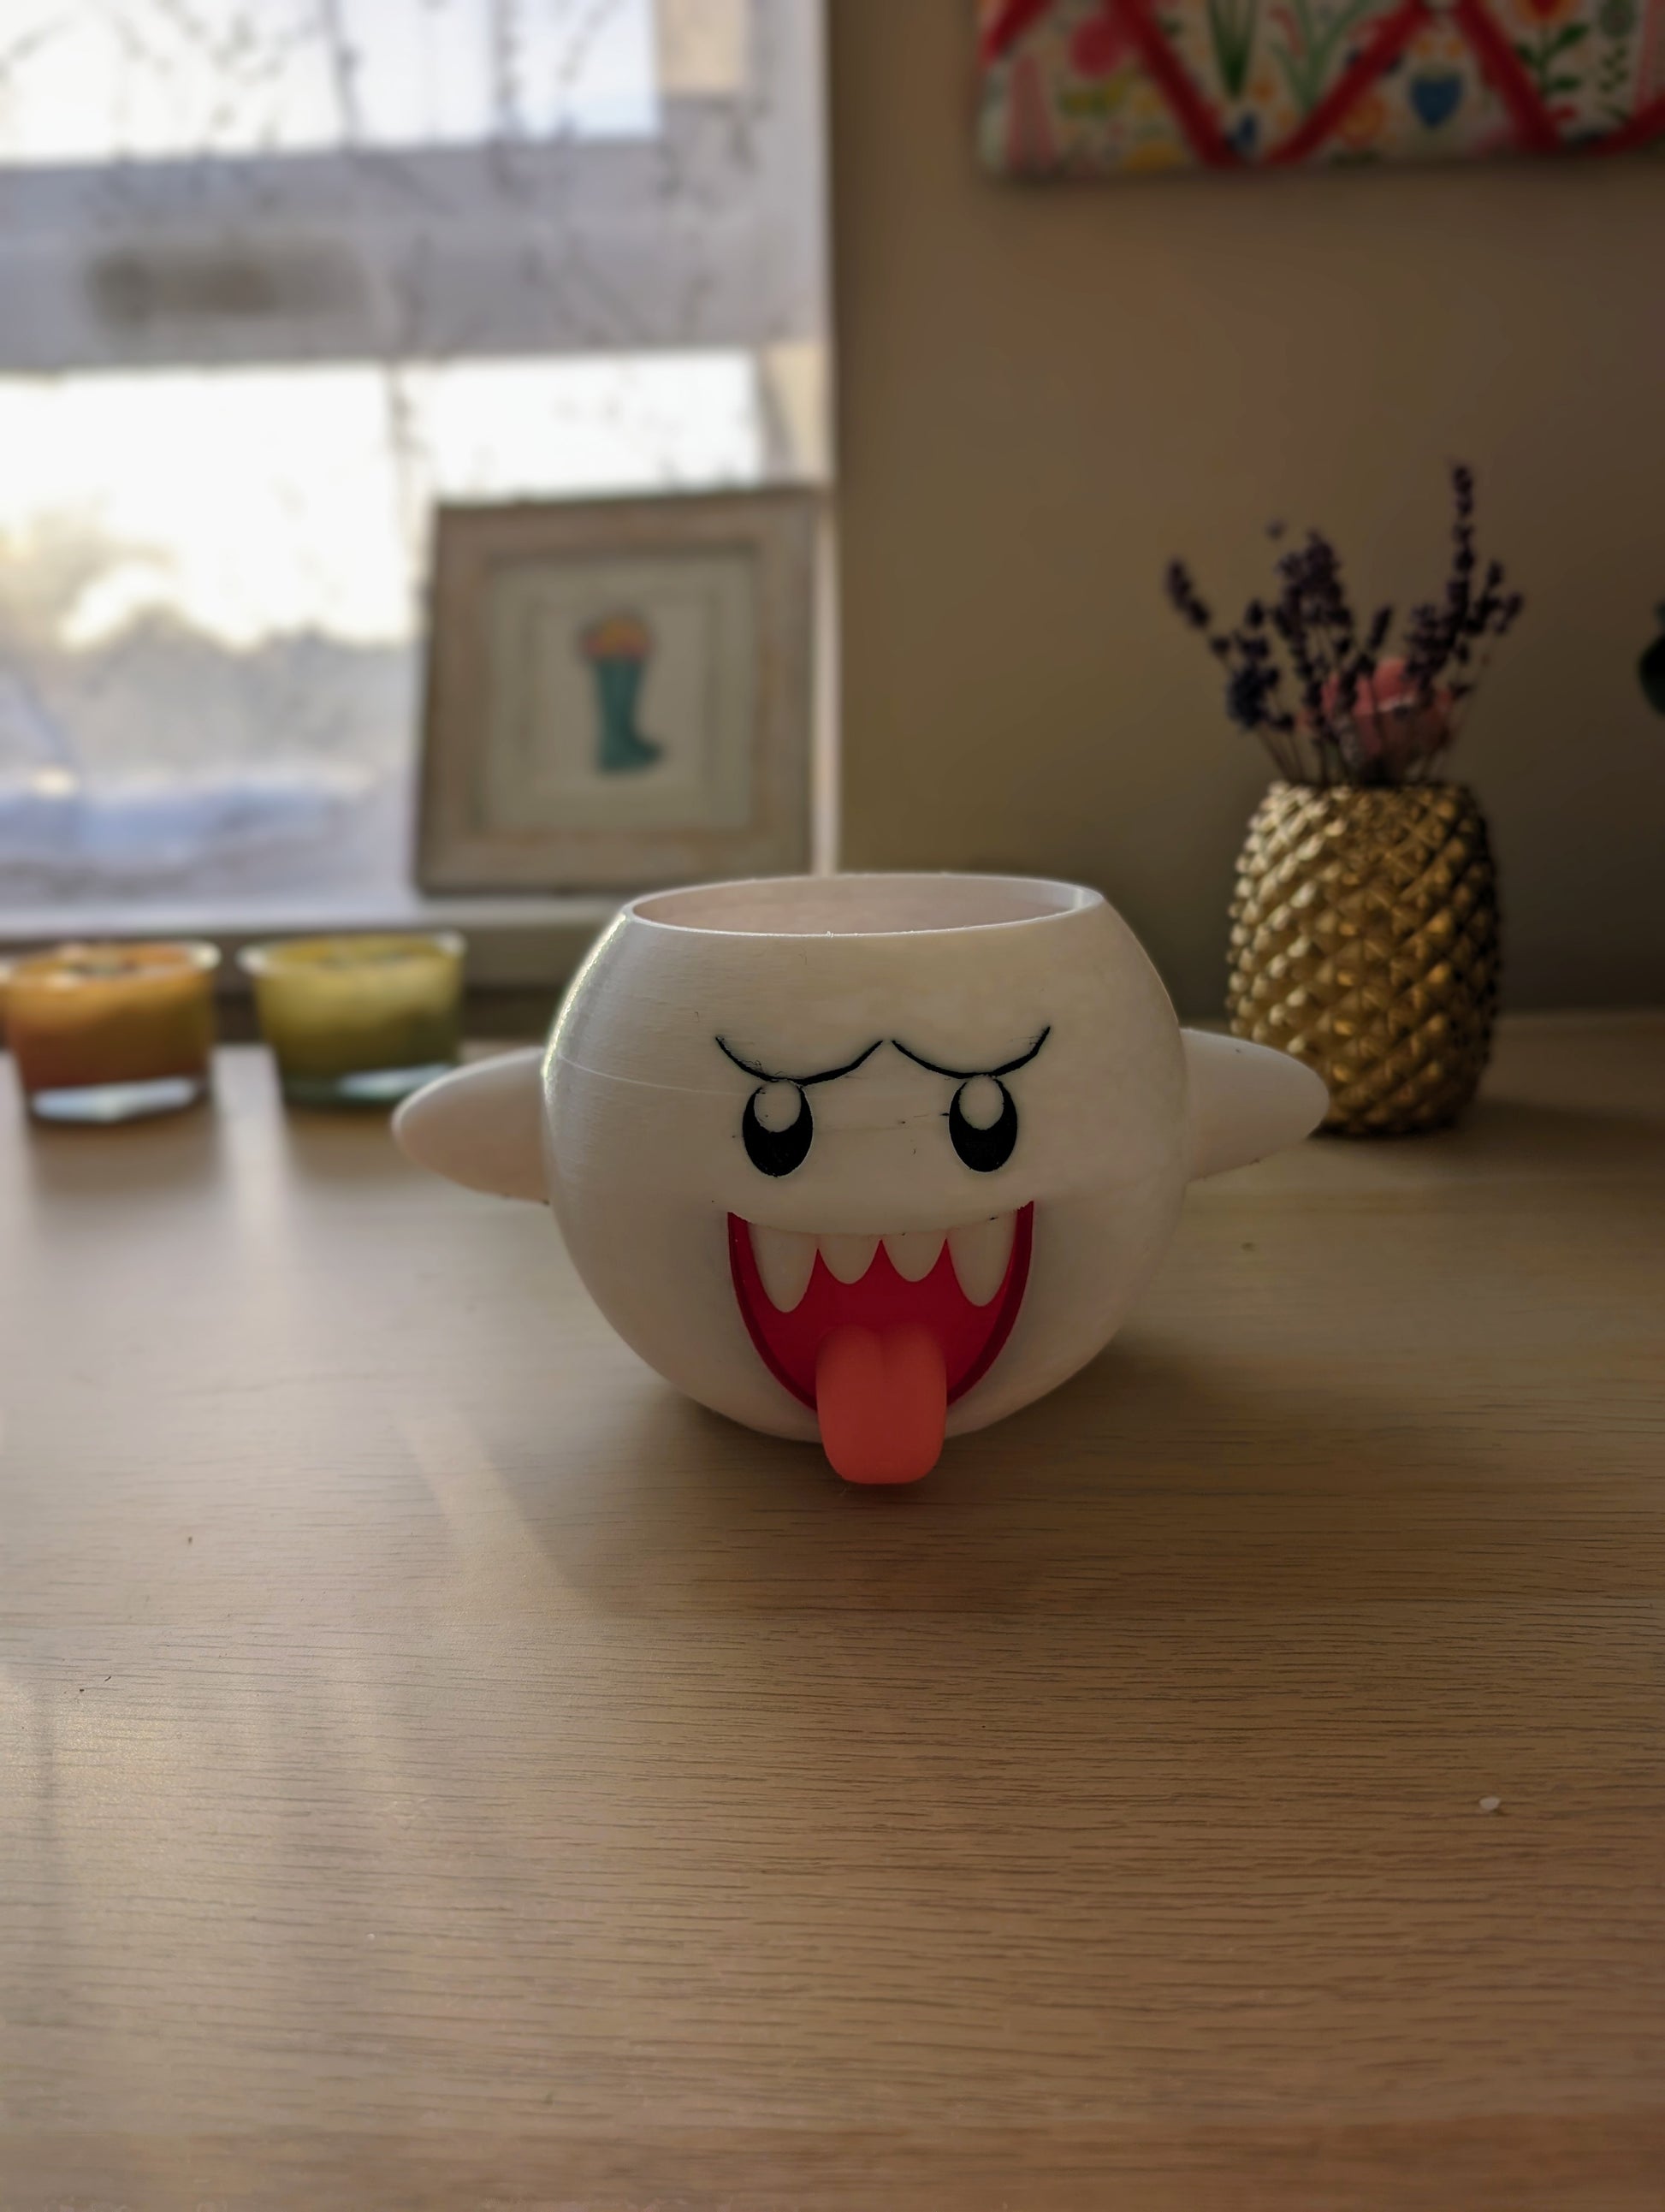 Mario Boo planter from the front on desk